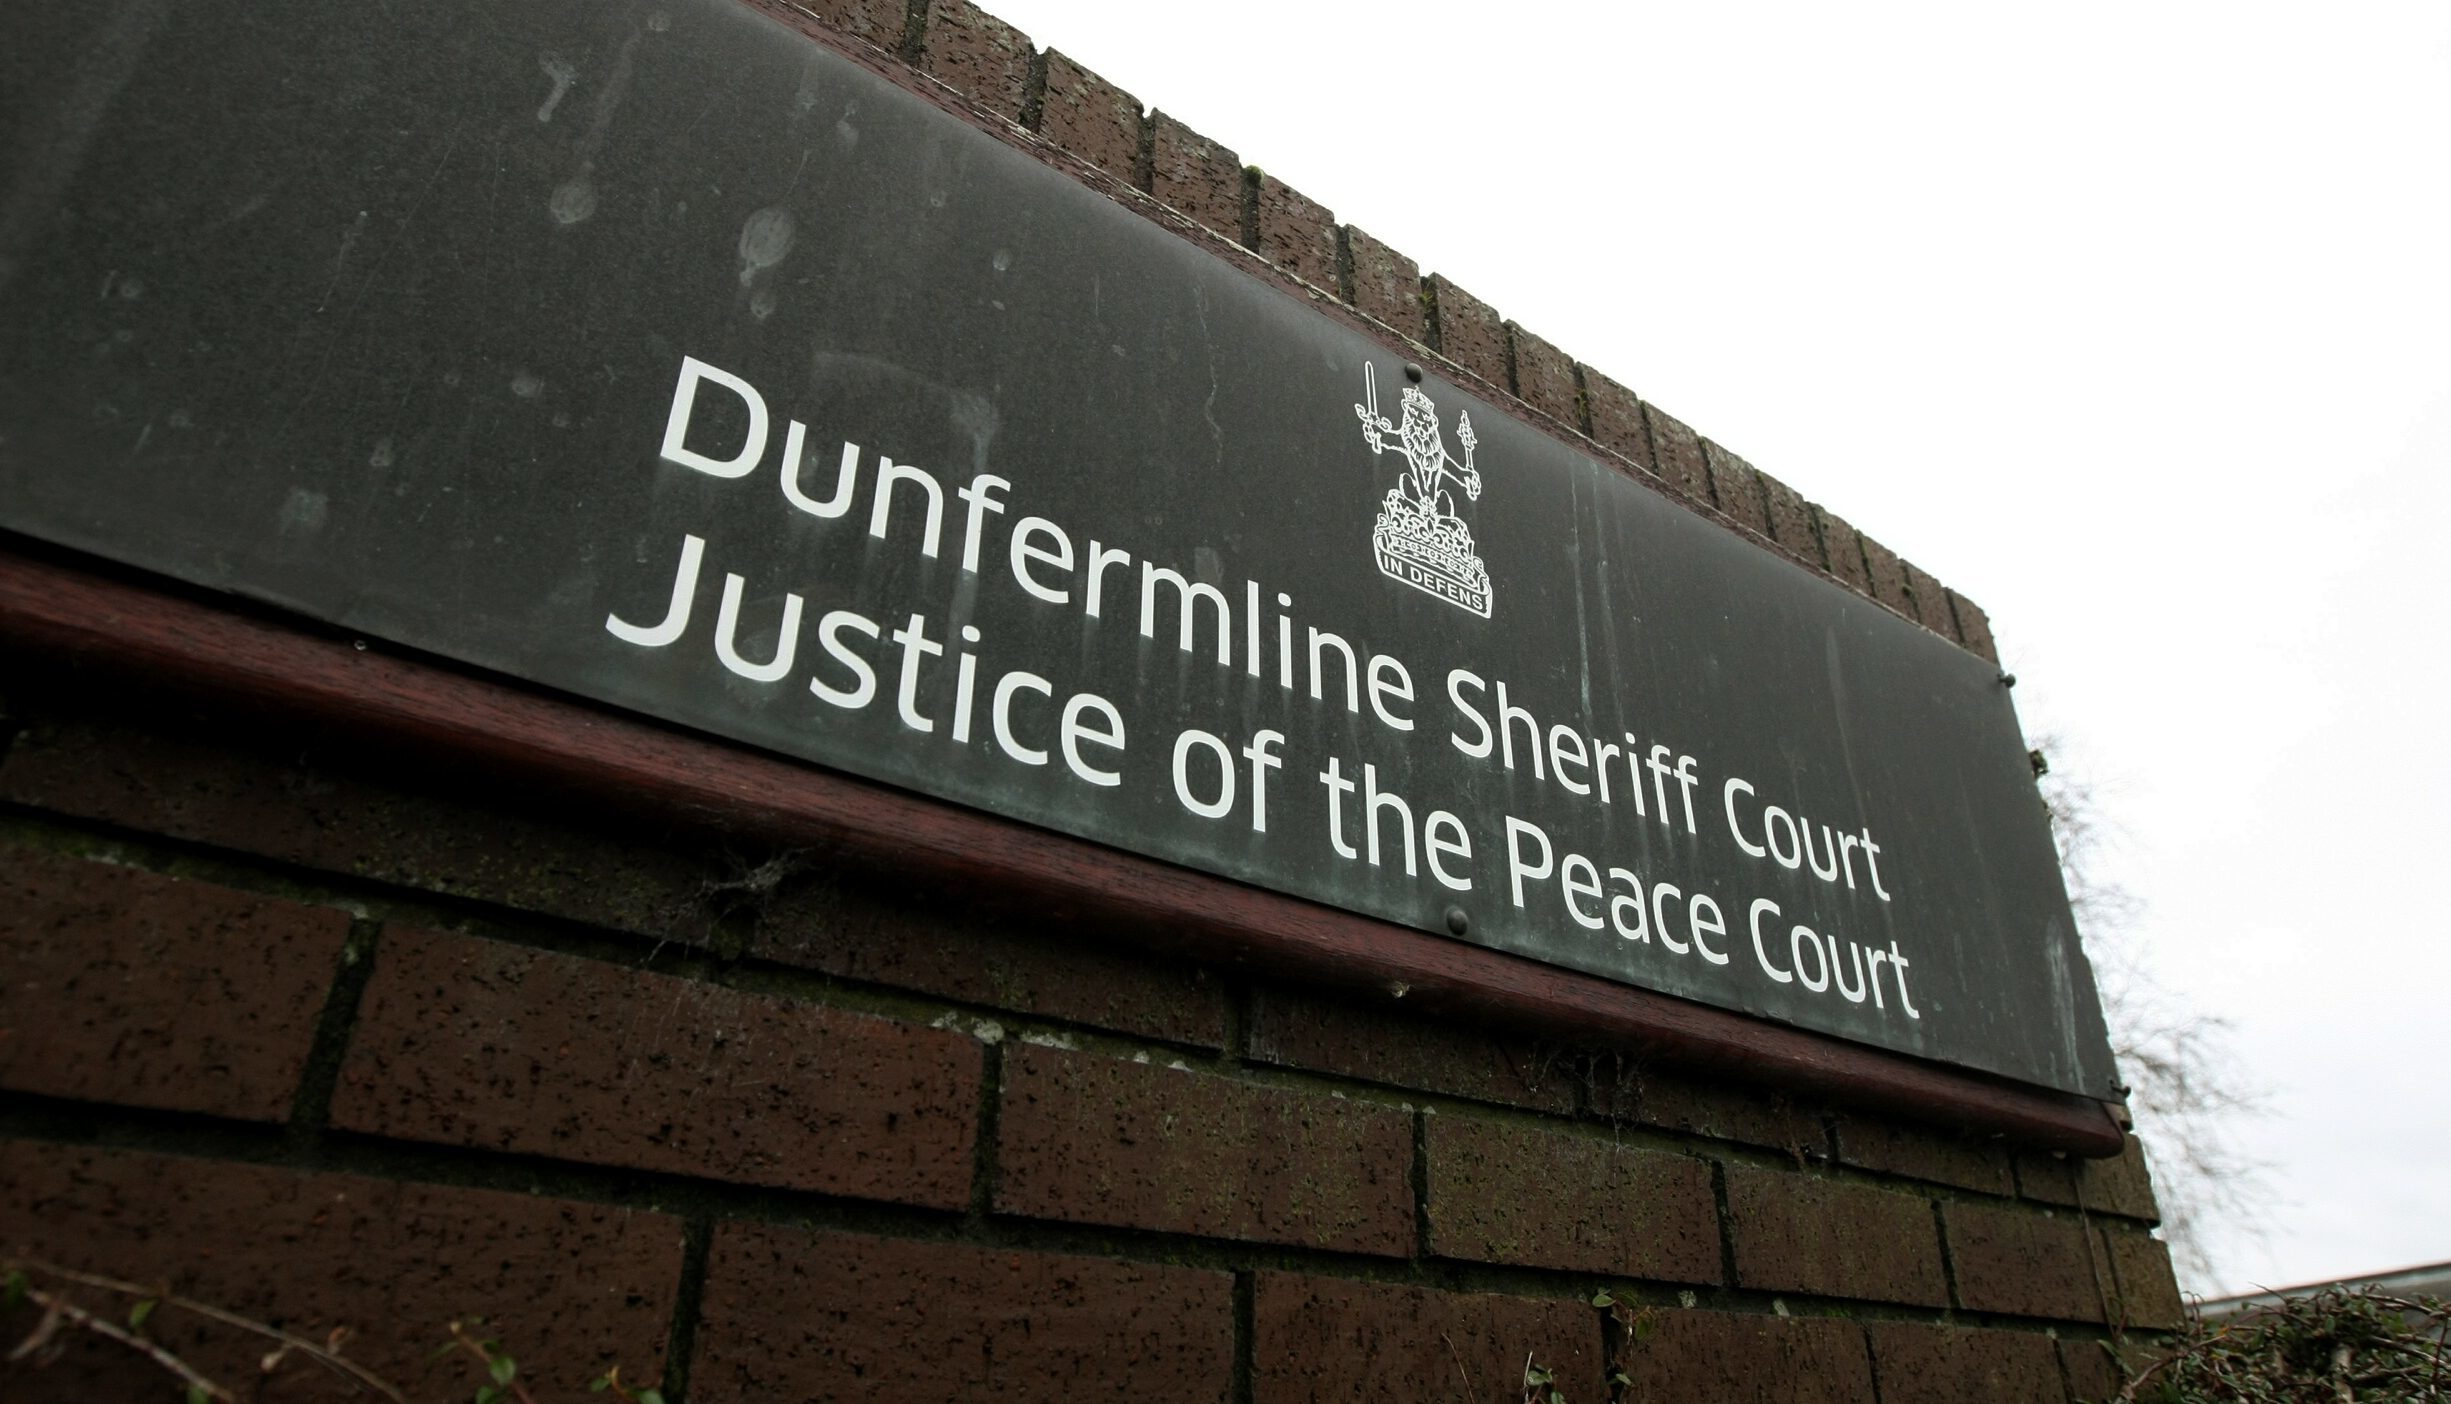 Olborski was brought from custody to Dunfermline Sheriff Court for his anti-Scottish rant.